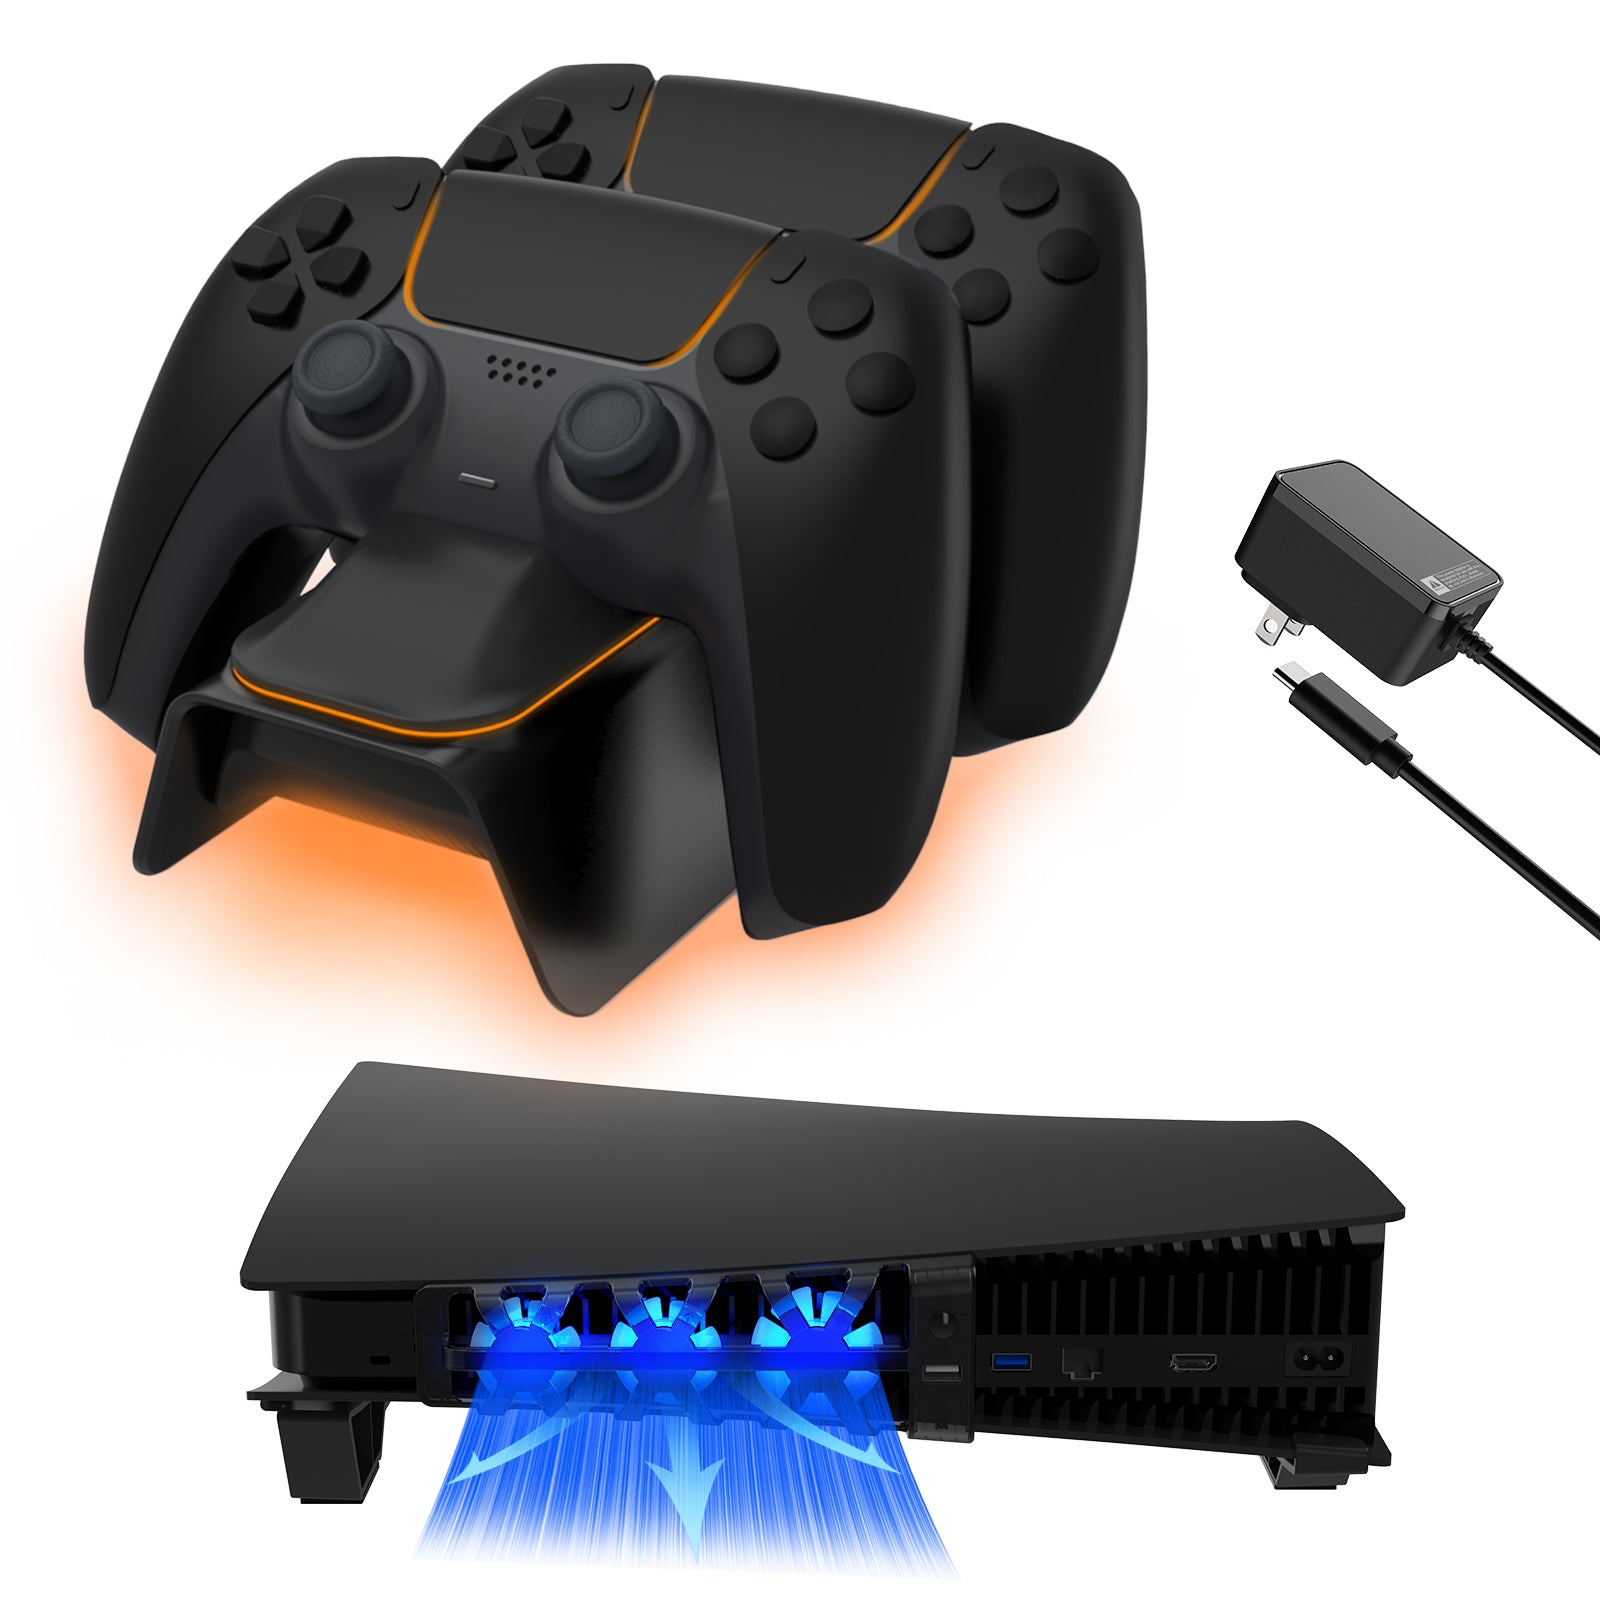 NexiGo PS5 Horizontal Stand with Controller Charger and Cooling Fan.